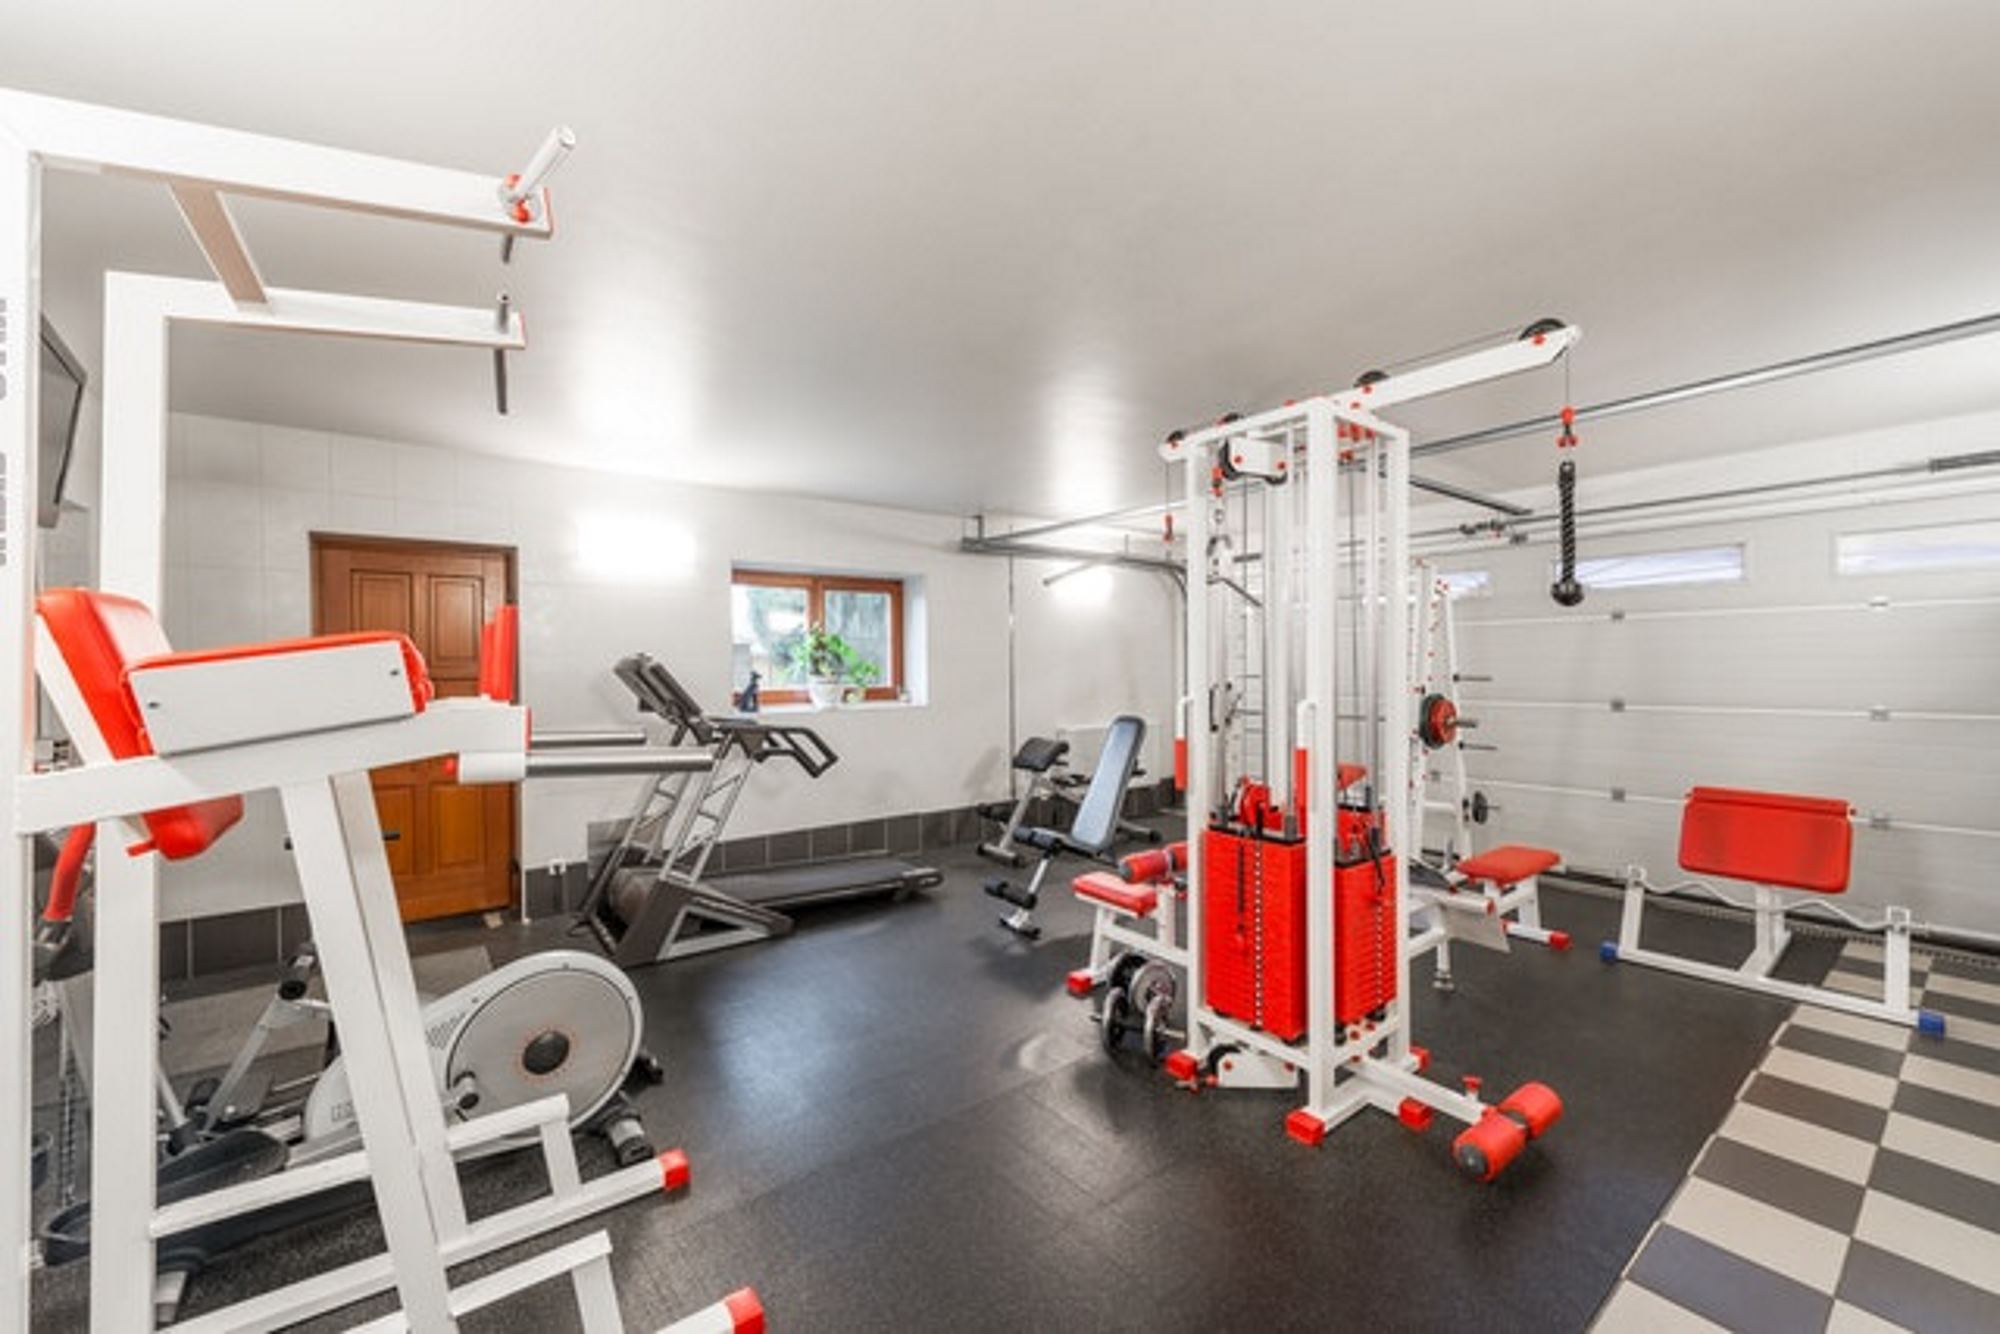 A variety of exercise and weight training equipment in a home garage gym